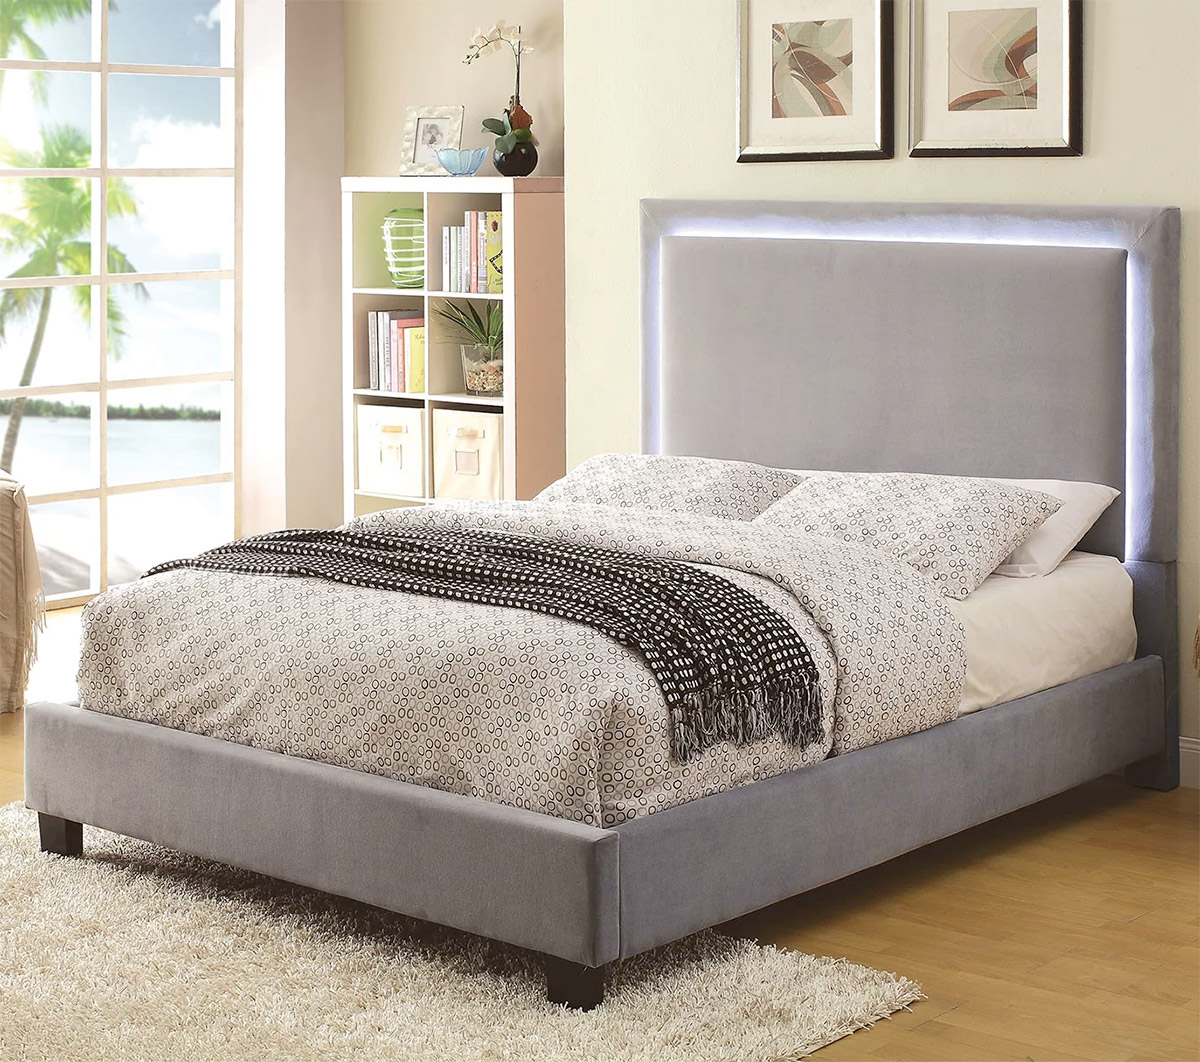 51 Modern Platform Beds To Refresh Your, King Size Headboard With Built In Reading Lights